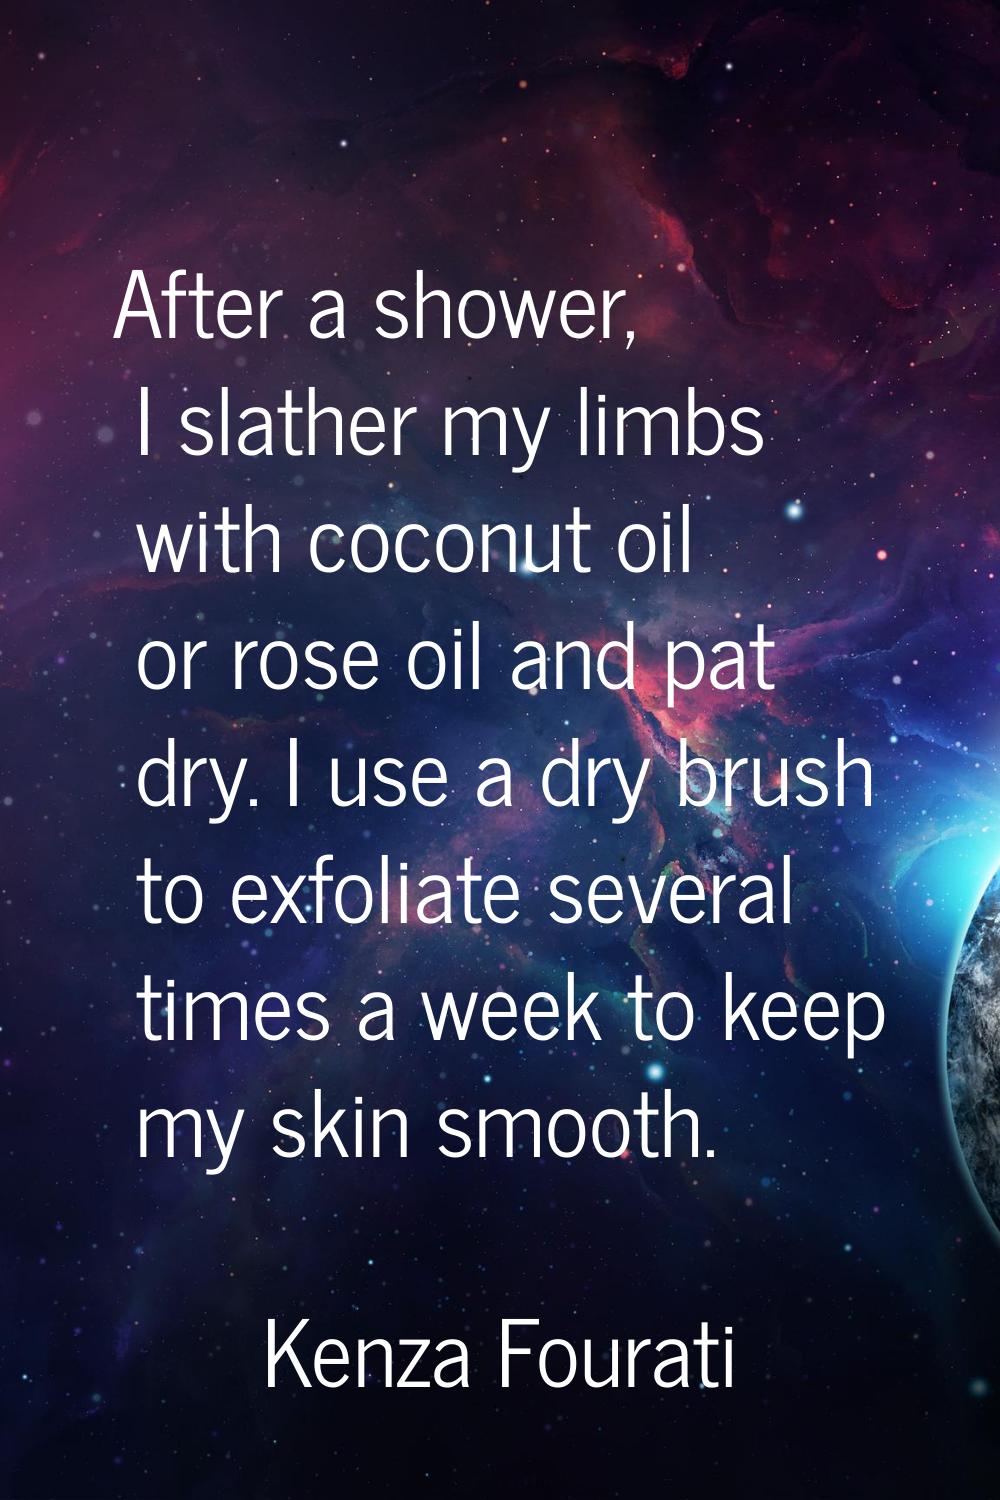 After a shower, I slather my limbs with coconut oil or rose oil and pat dry. I use a dry brush to e